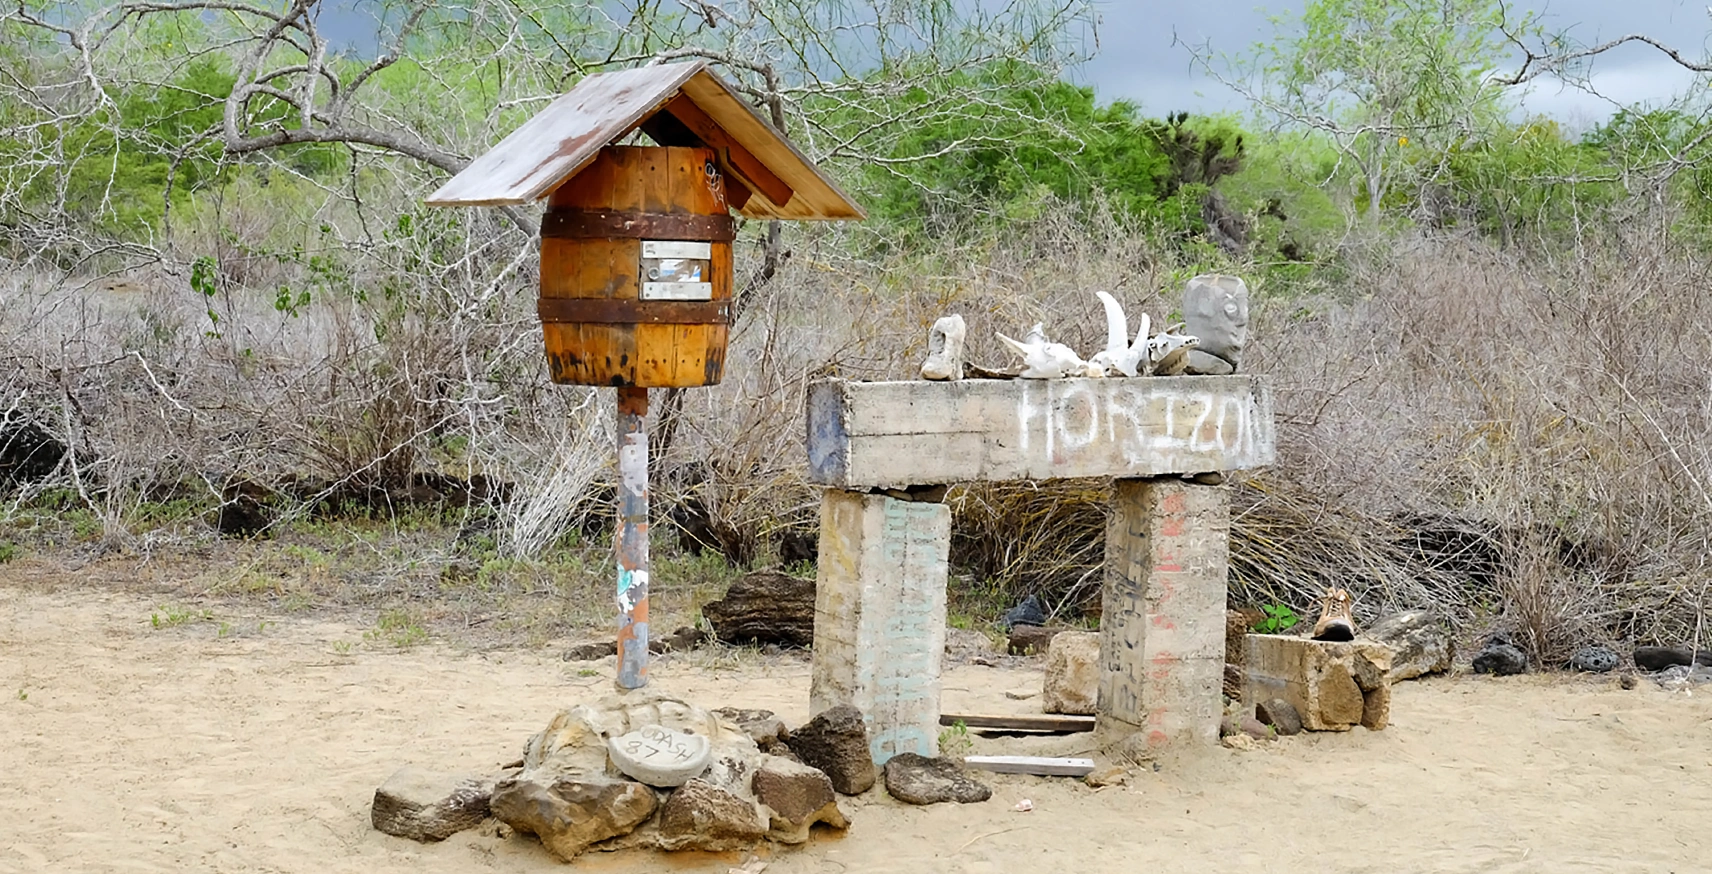 galapagos-tribute-yacht-post-office